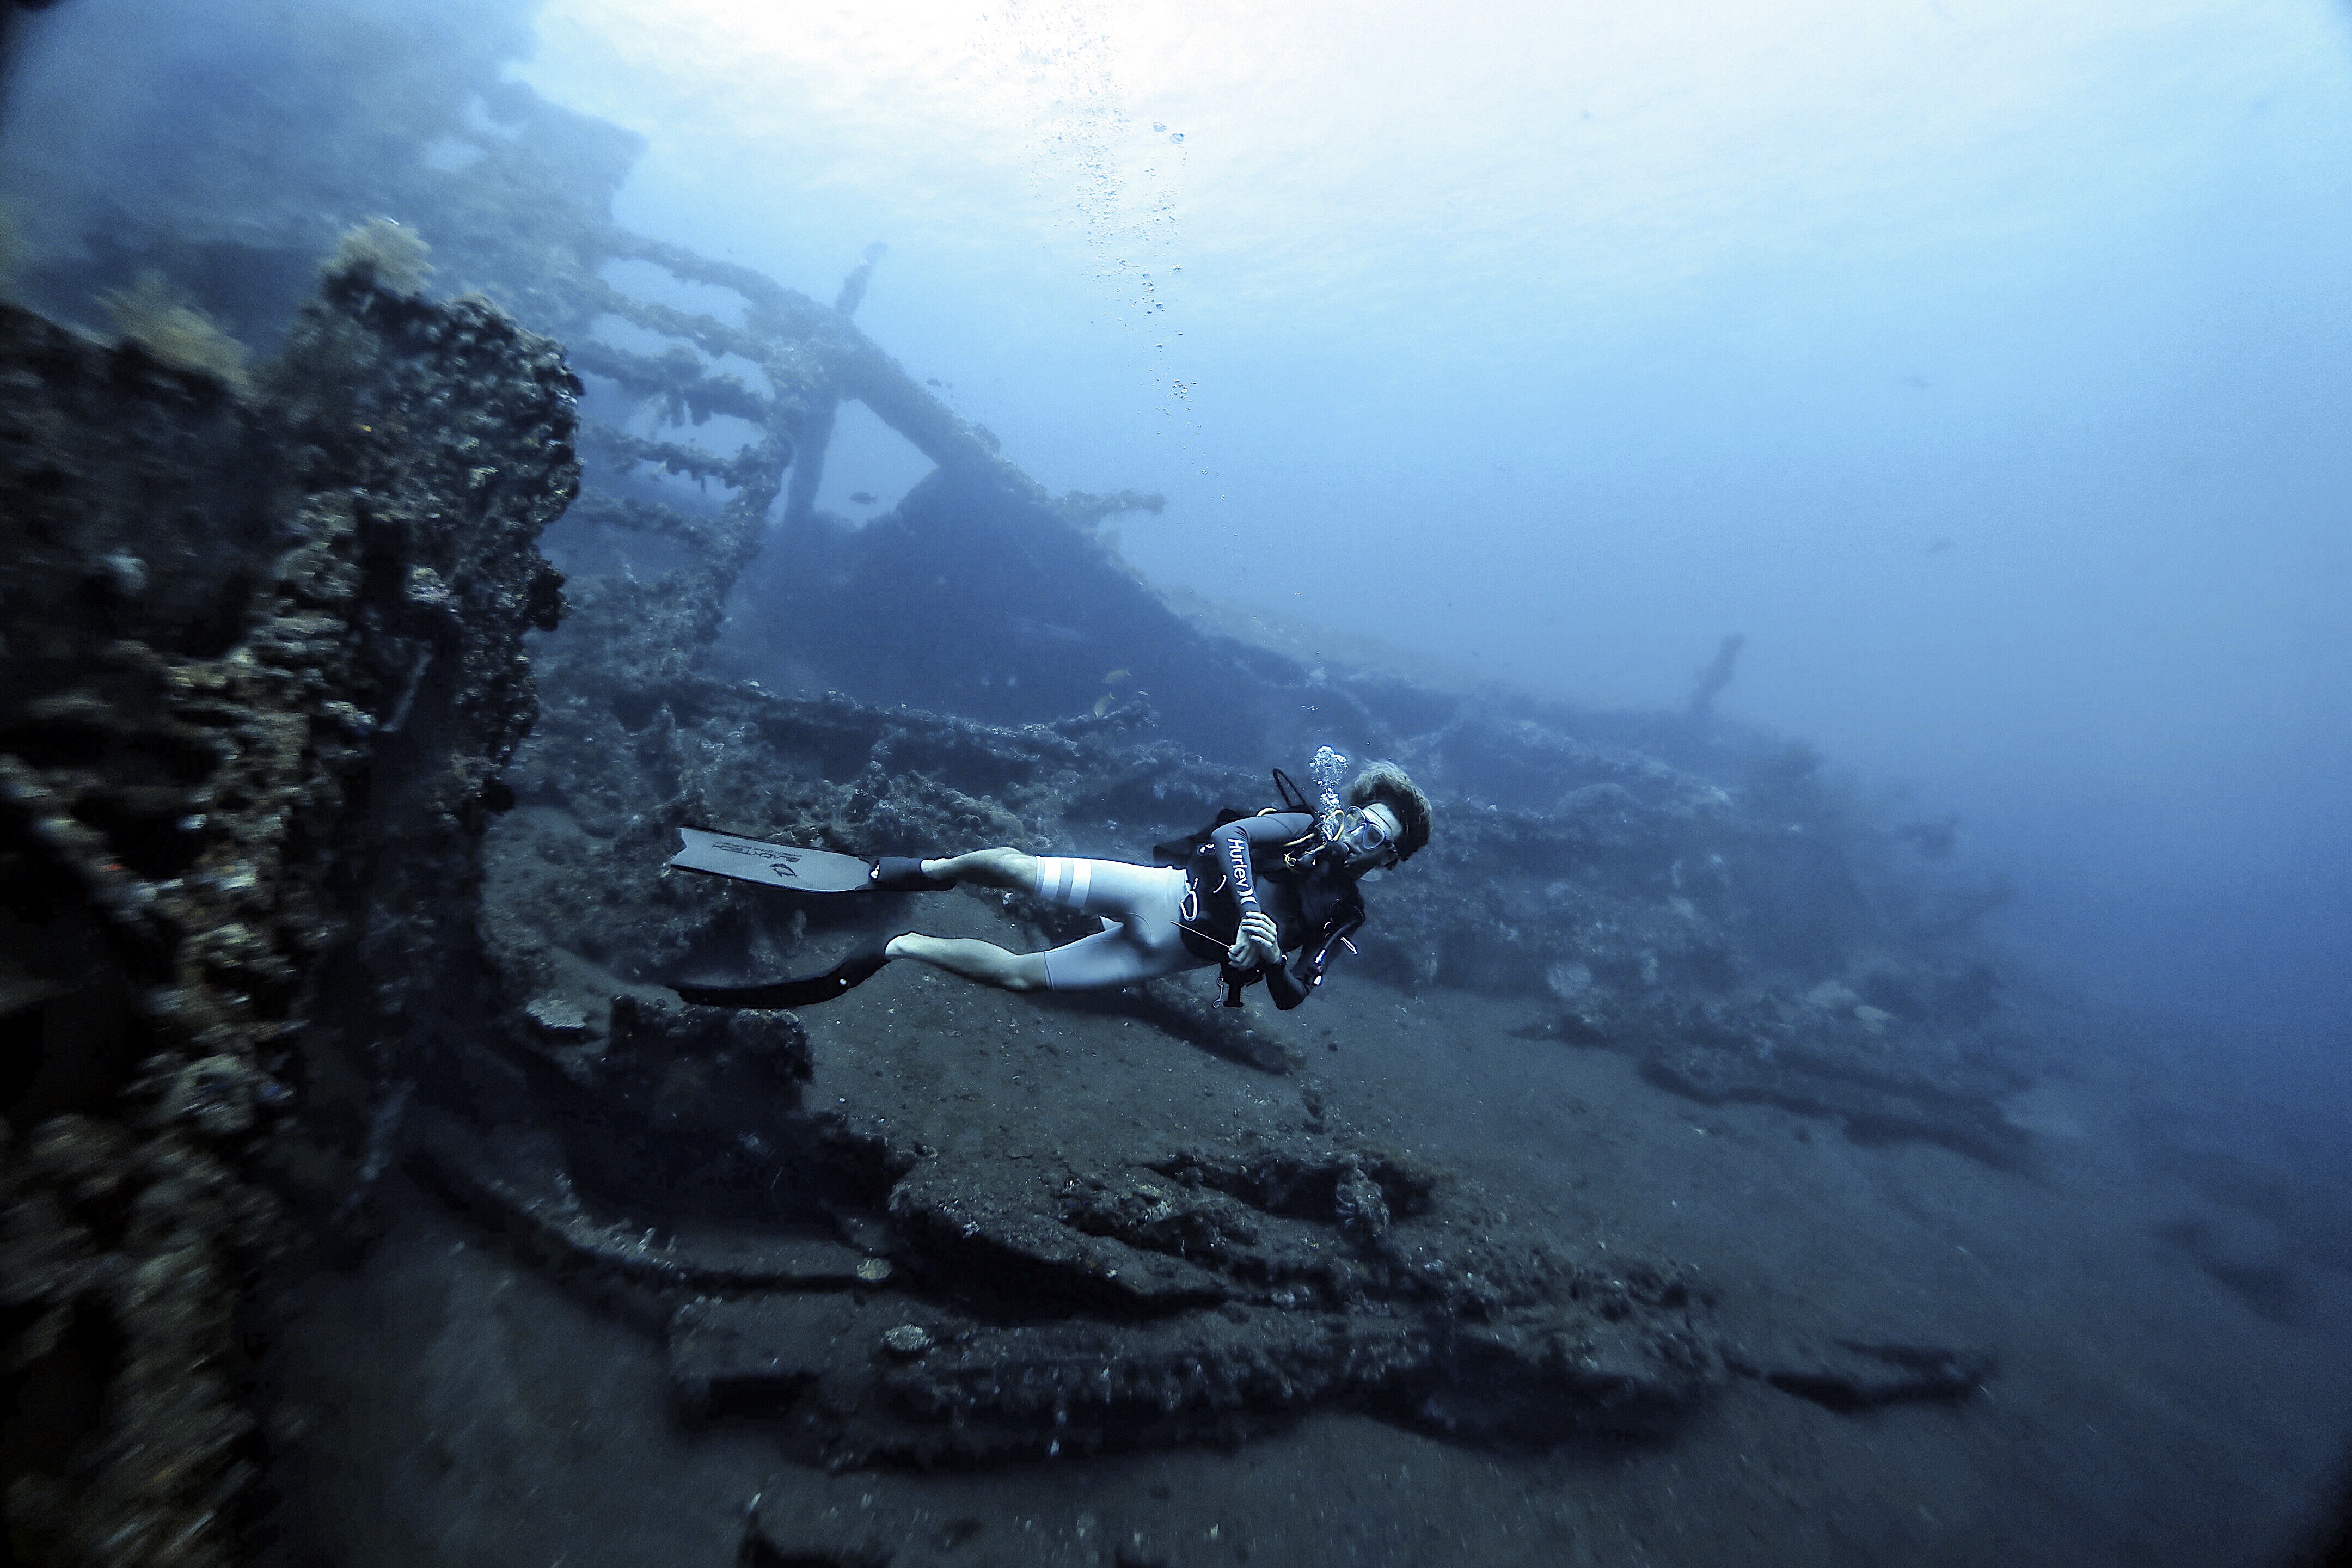 Scuba diving on the USAT Liberty Shipwreck in Tulamben